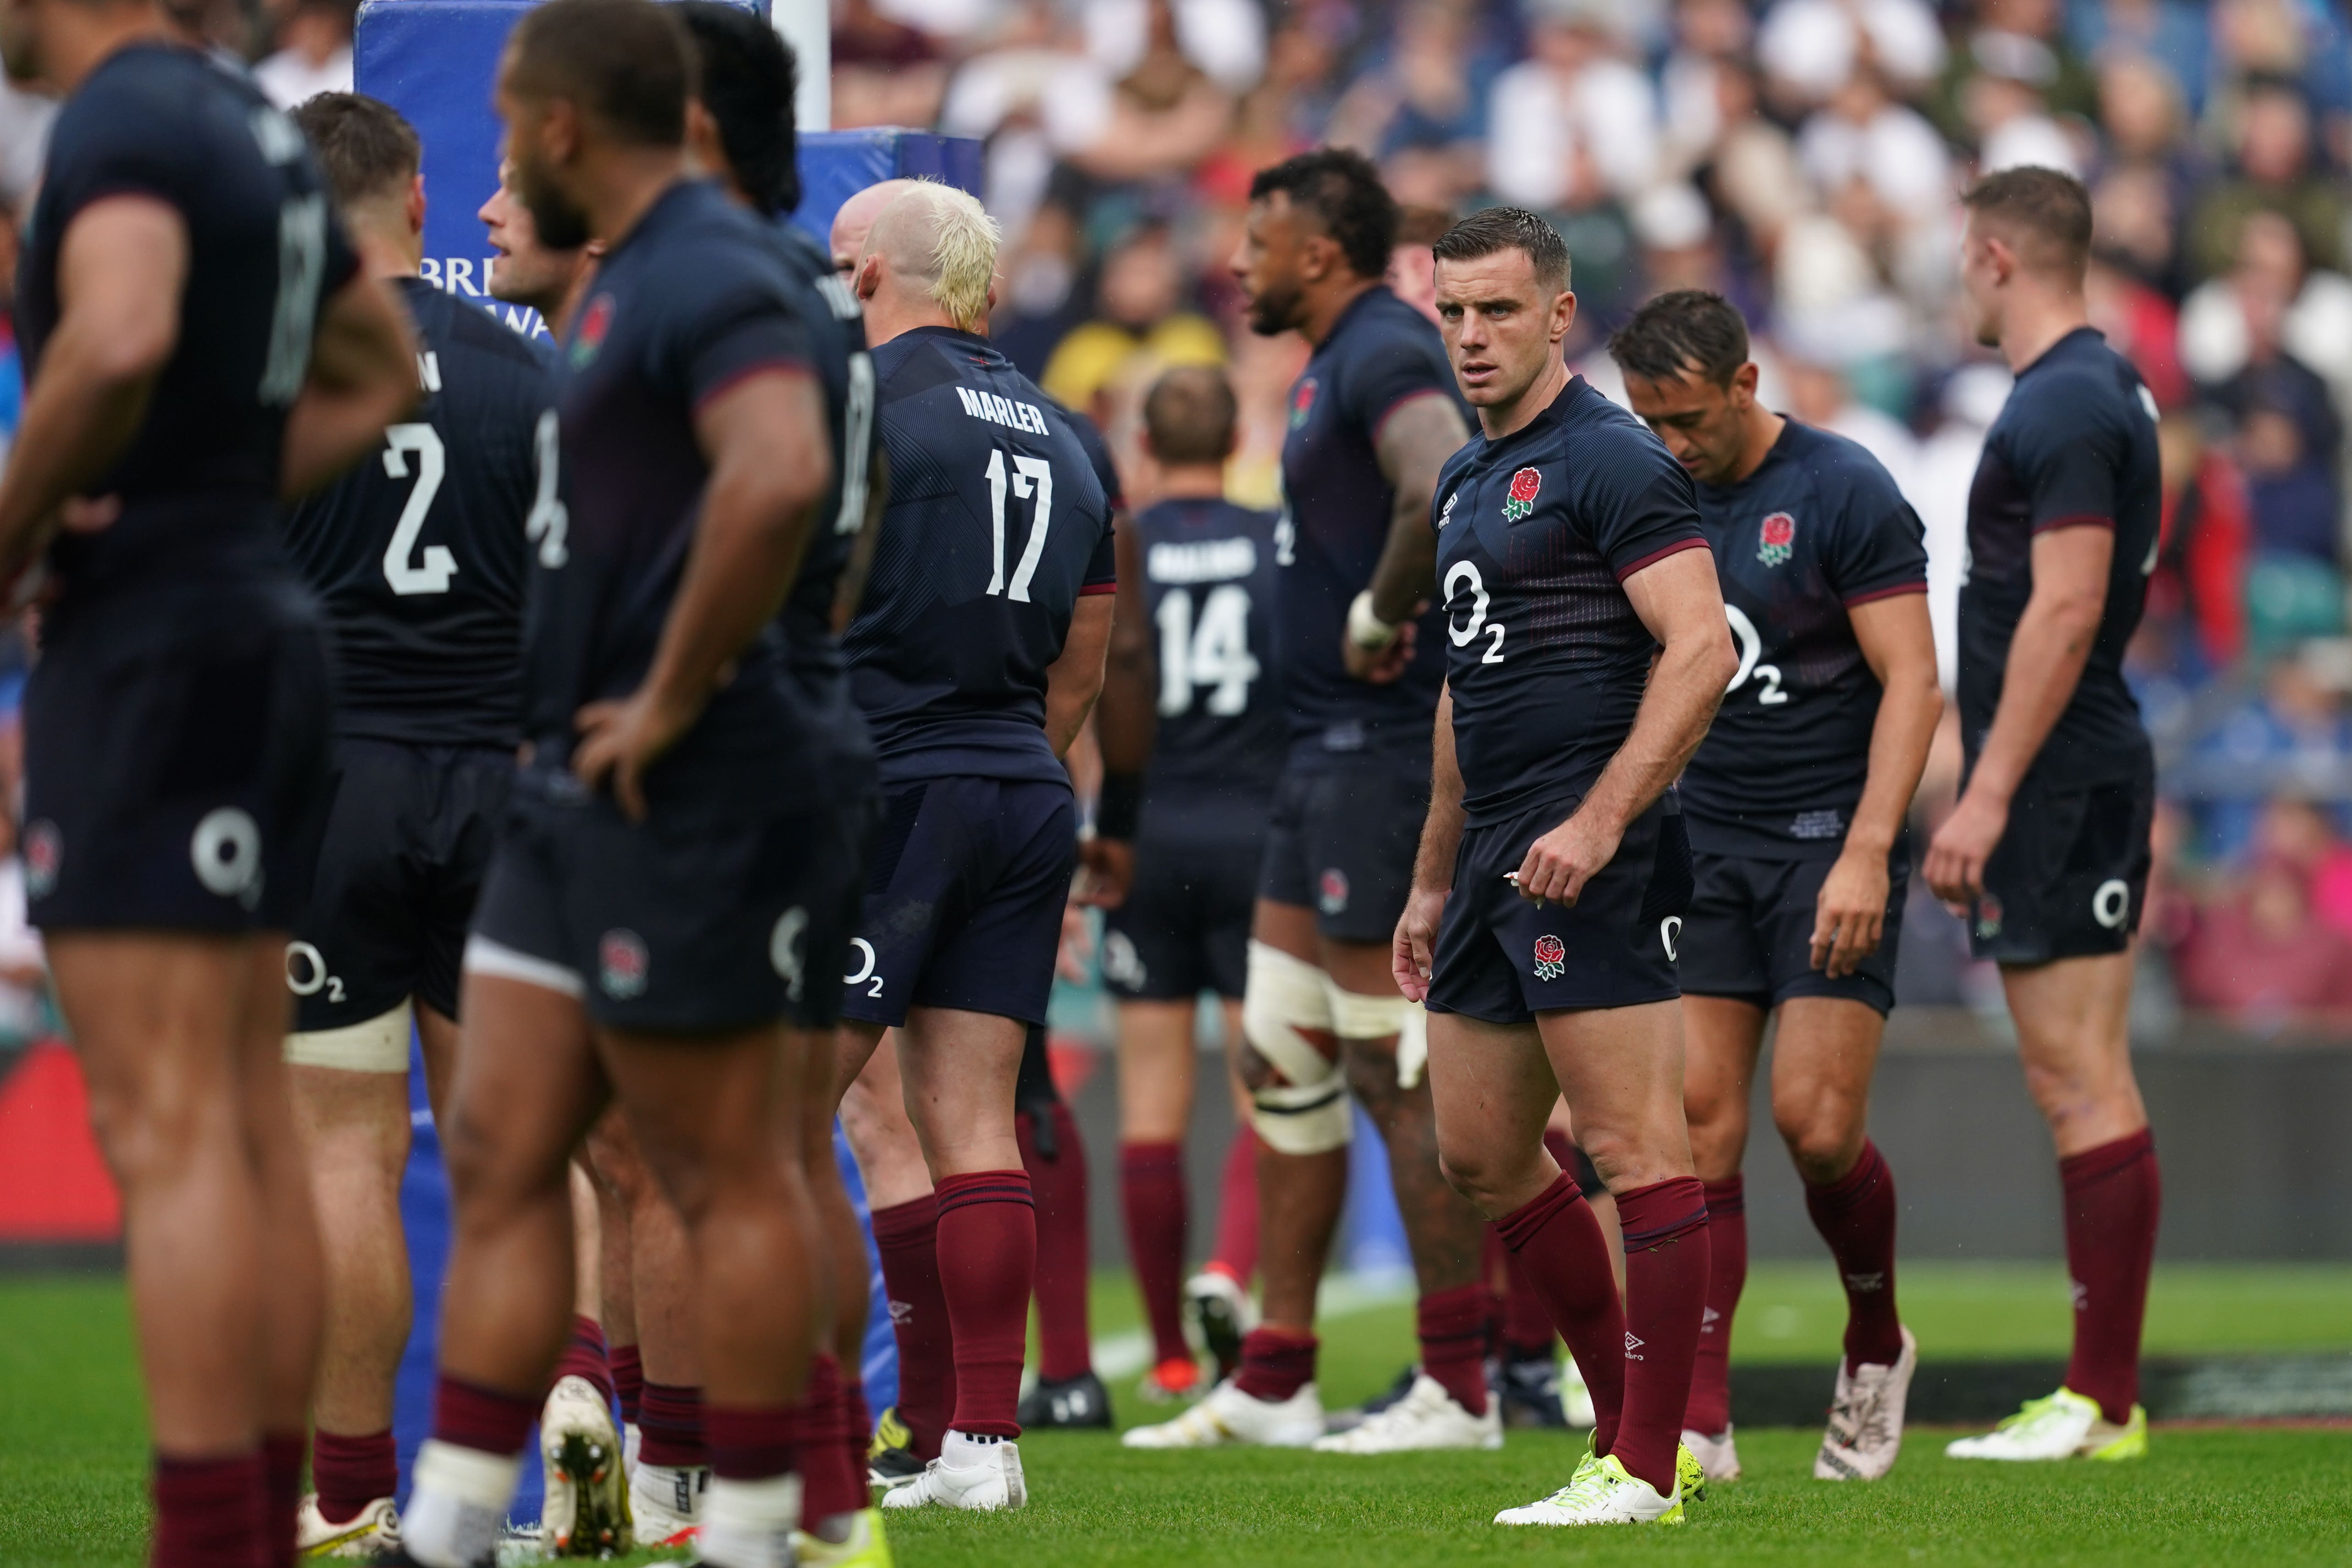 George Ford admits England must confront their shortcomings after losing to Fiji (David Davies/PA)